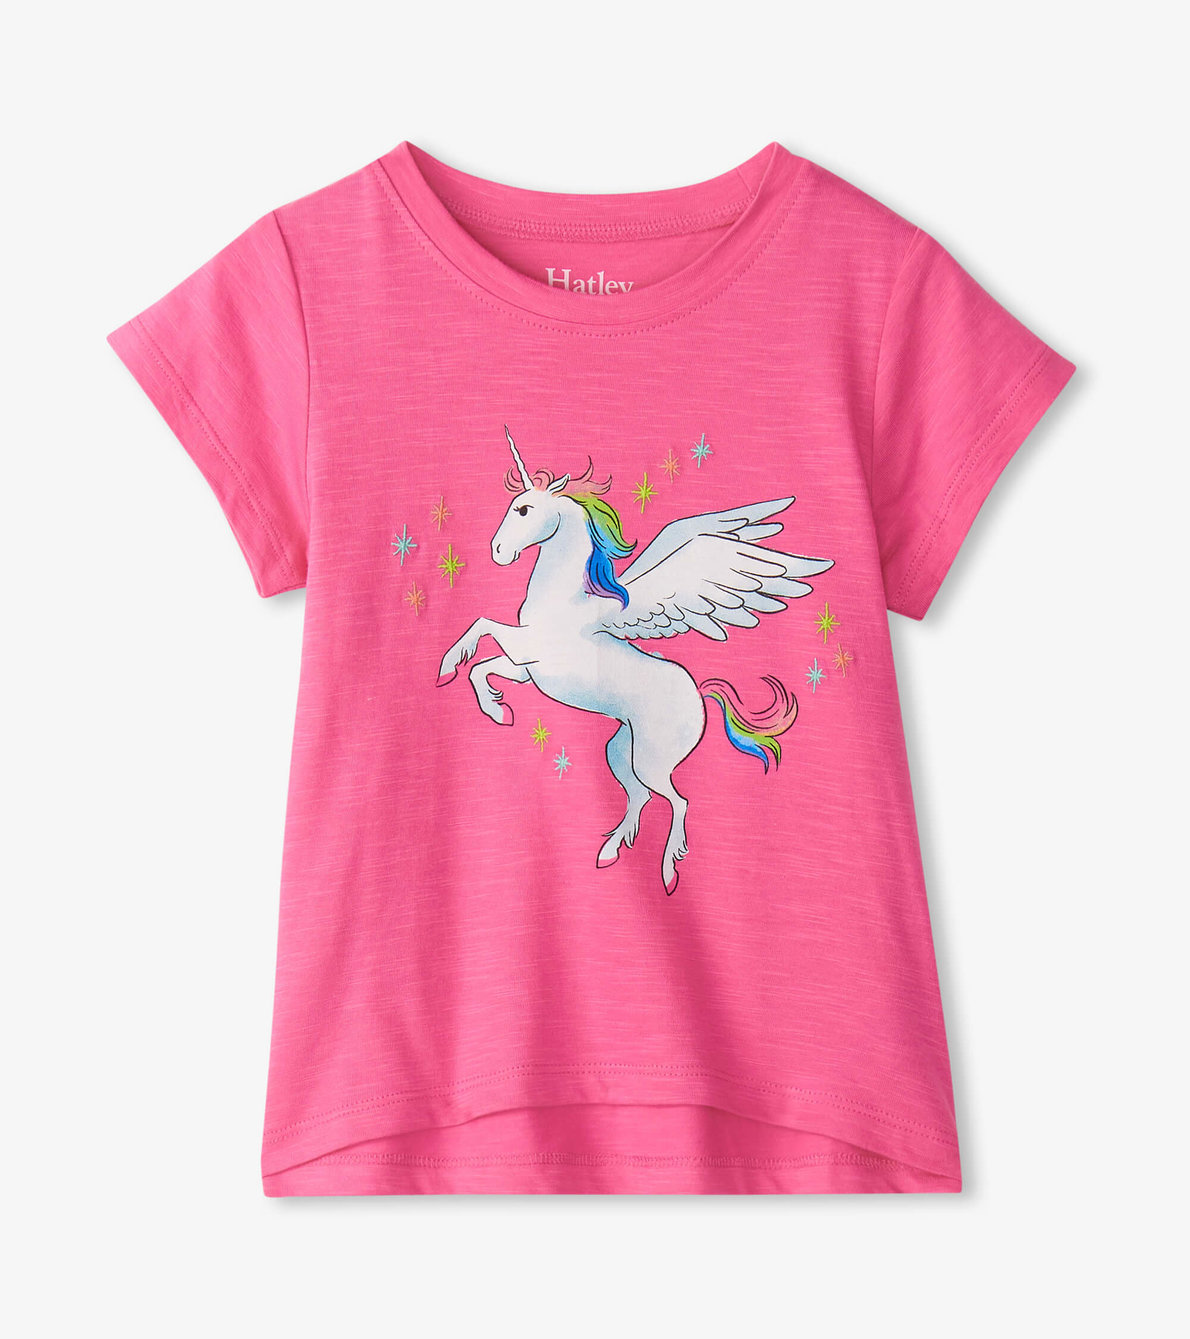 View larger image of Baby & Toddler Girls Rainbow Unicorn Graphic Tee